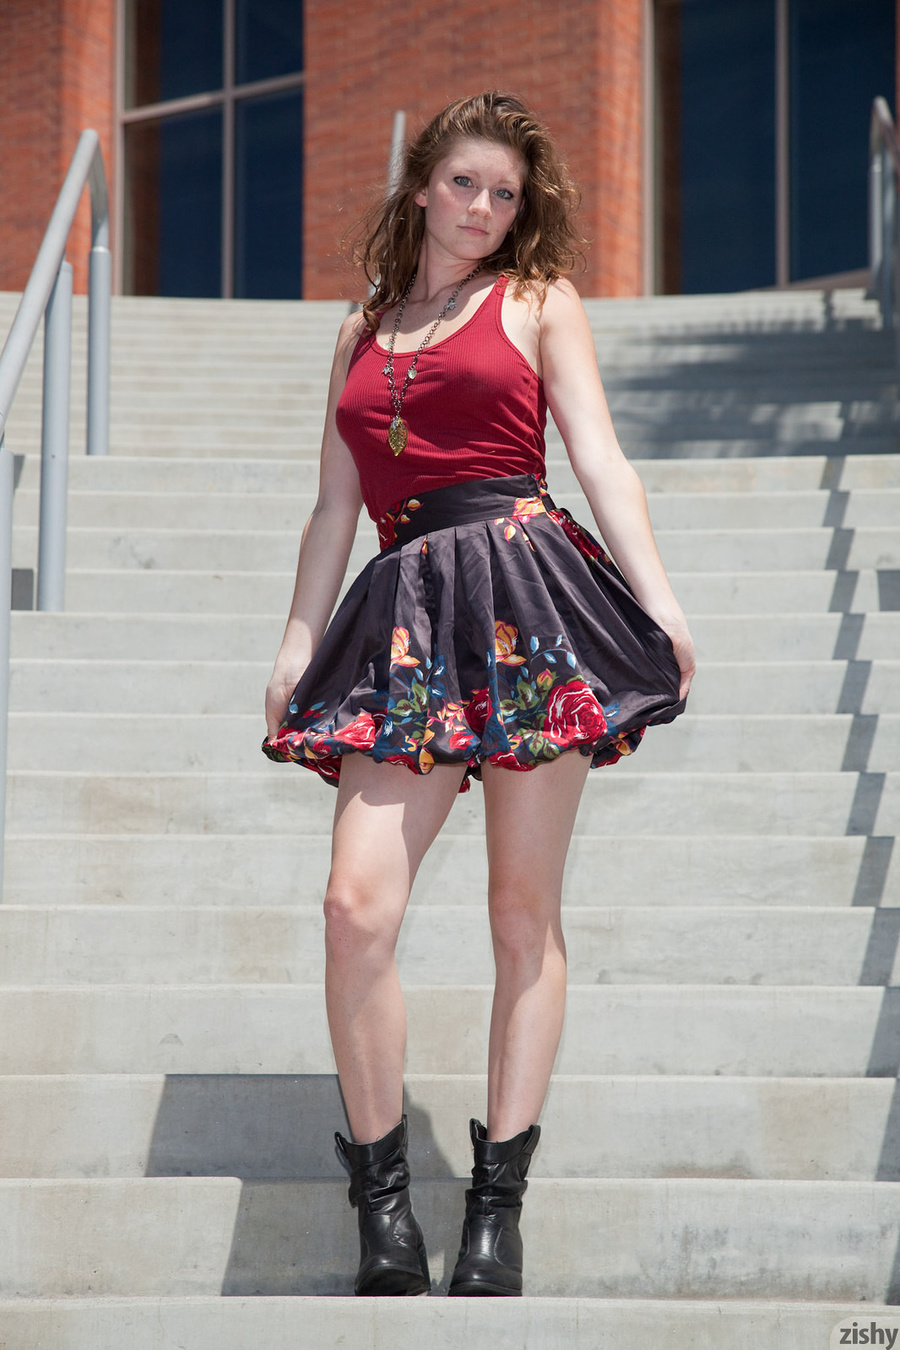 Magnificent ginger teen in nice skirt and r - XXX Dessert - Picture 1